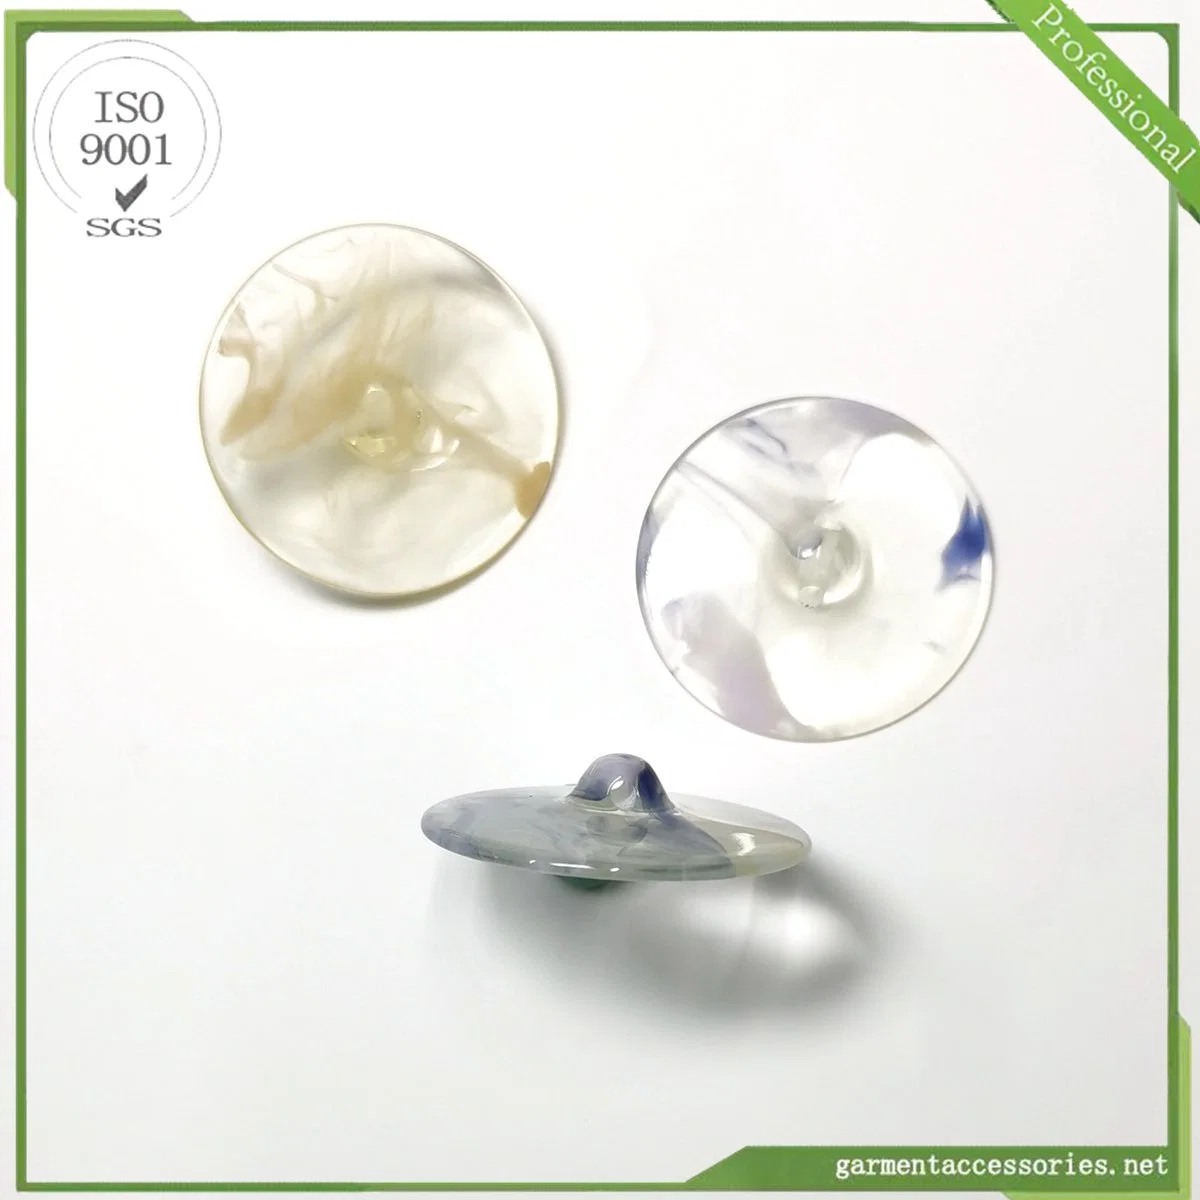 Resin and Plastic Buttons for Fashion Garments